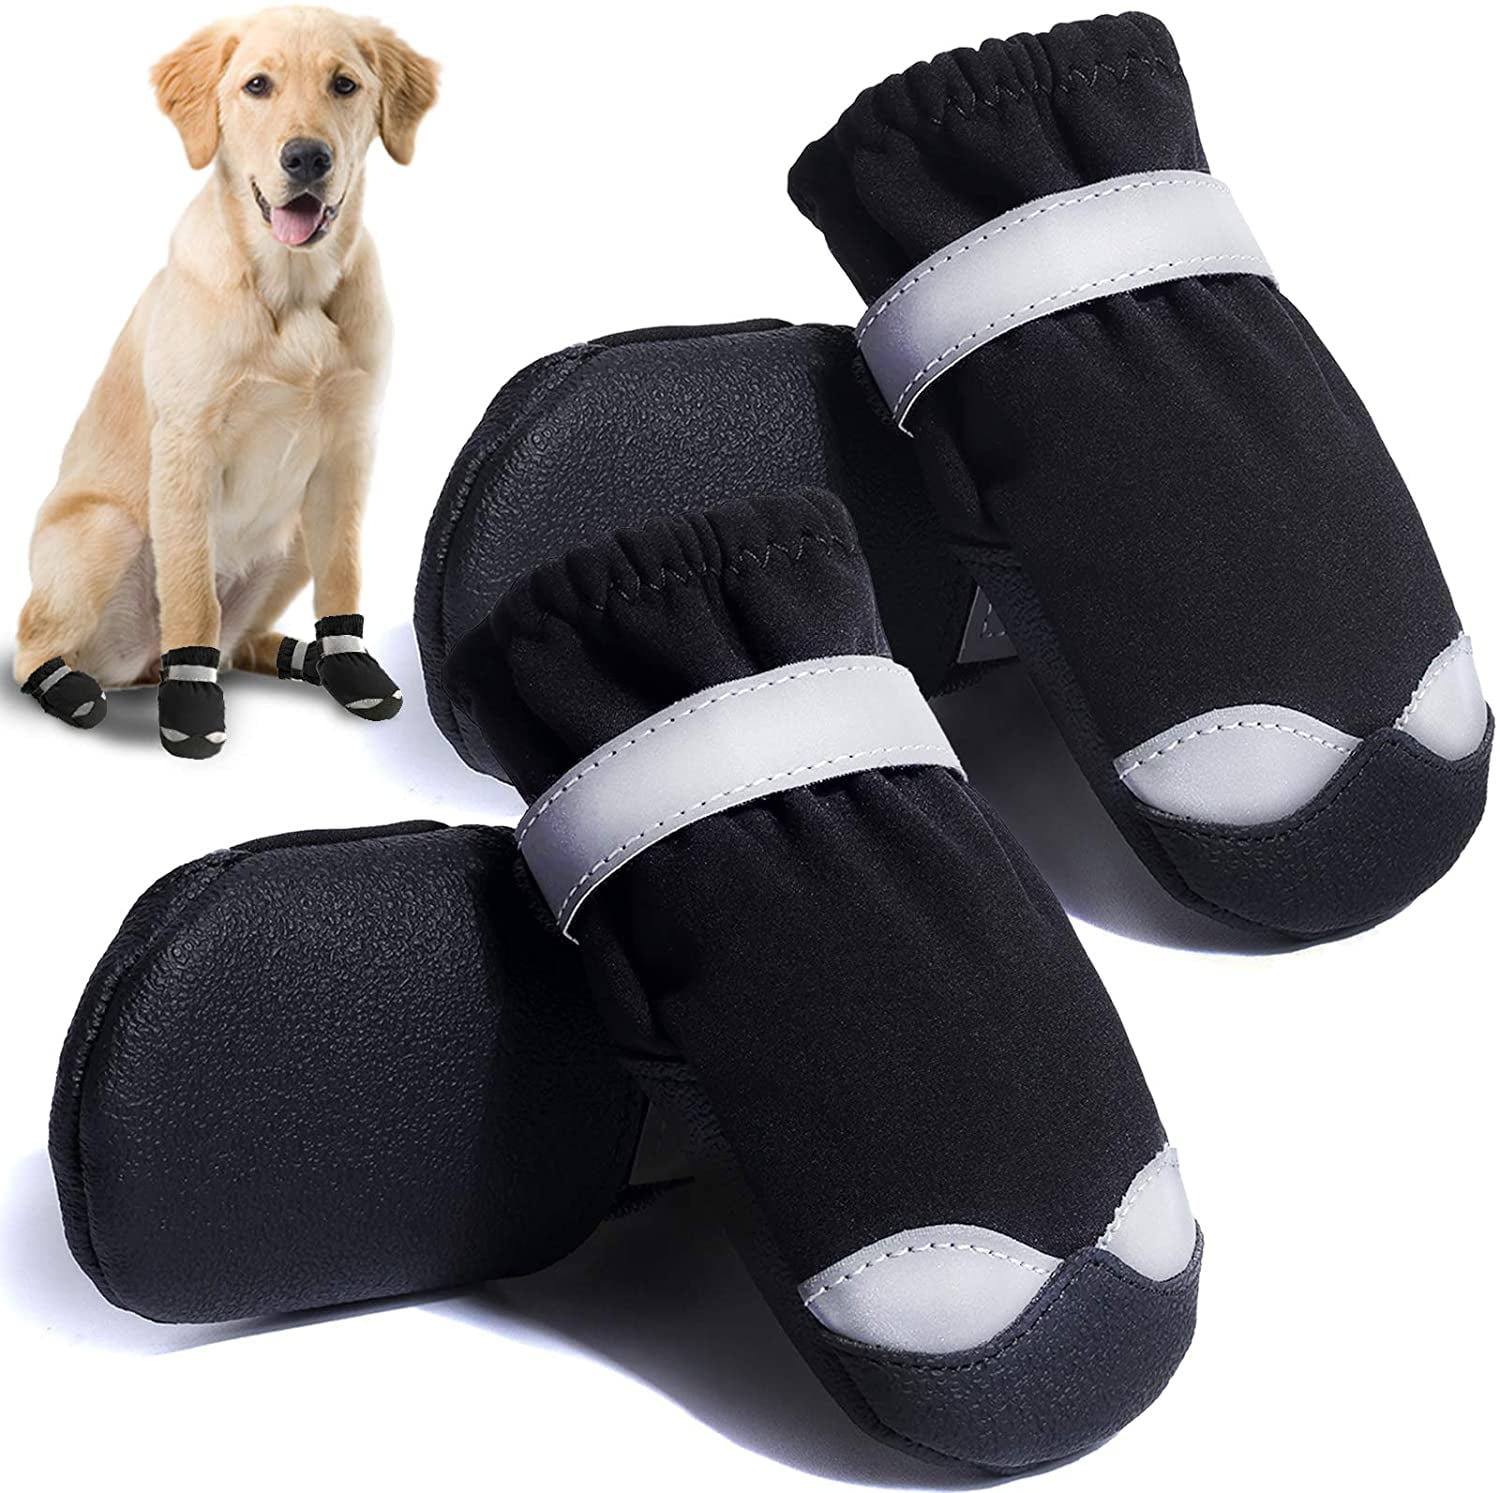 CALHNNA Dog Shoes Dog Booties Anti-Slip Dog Boots for Small Medium Dogs and Puppies Paw Protector 4PCS 